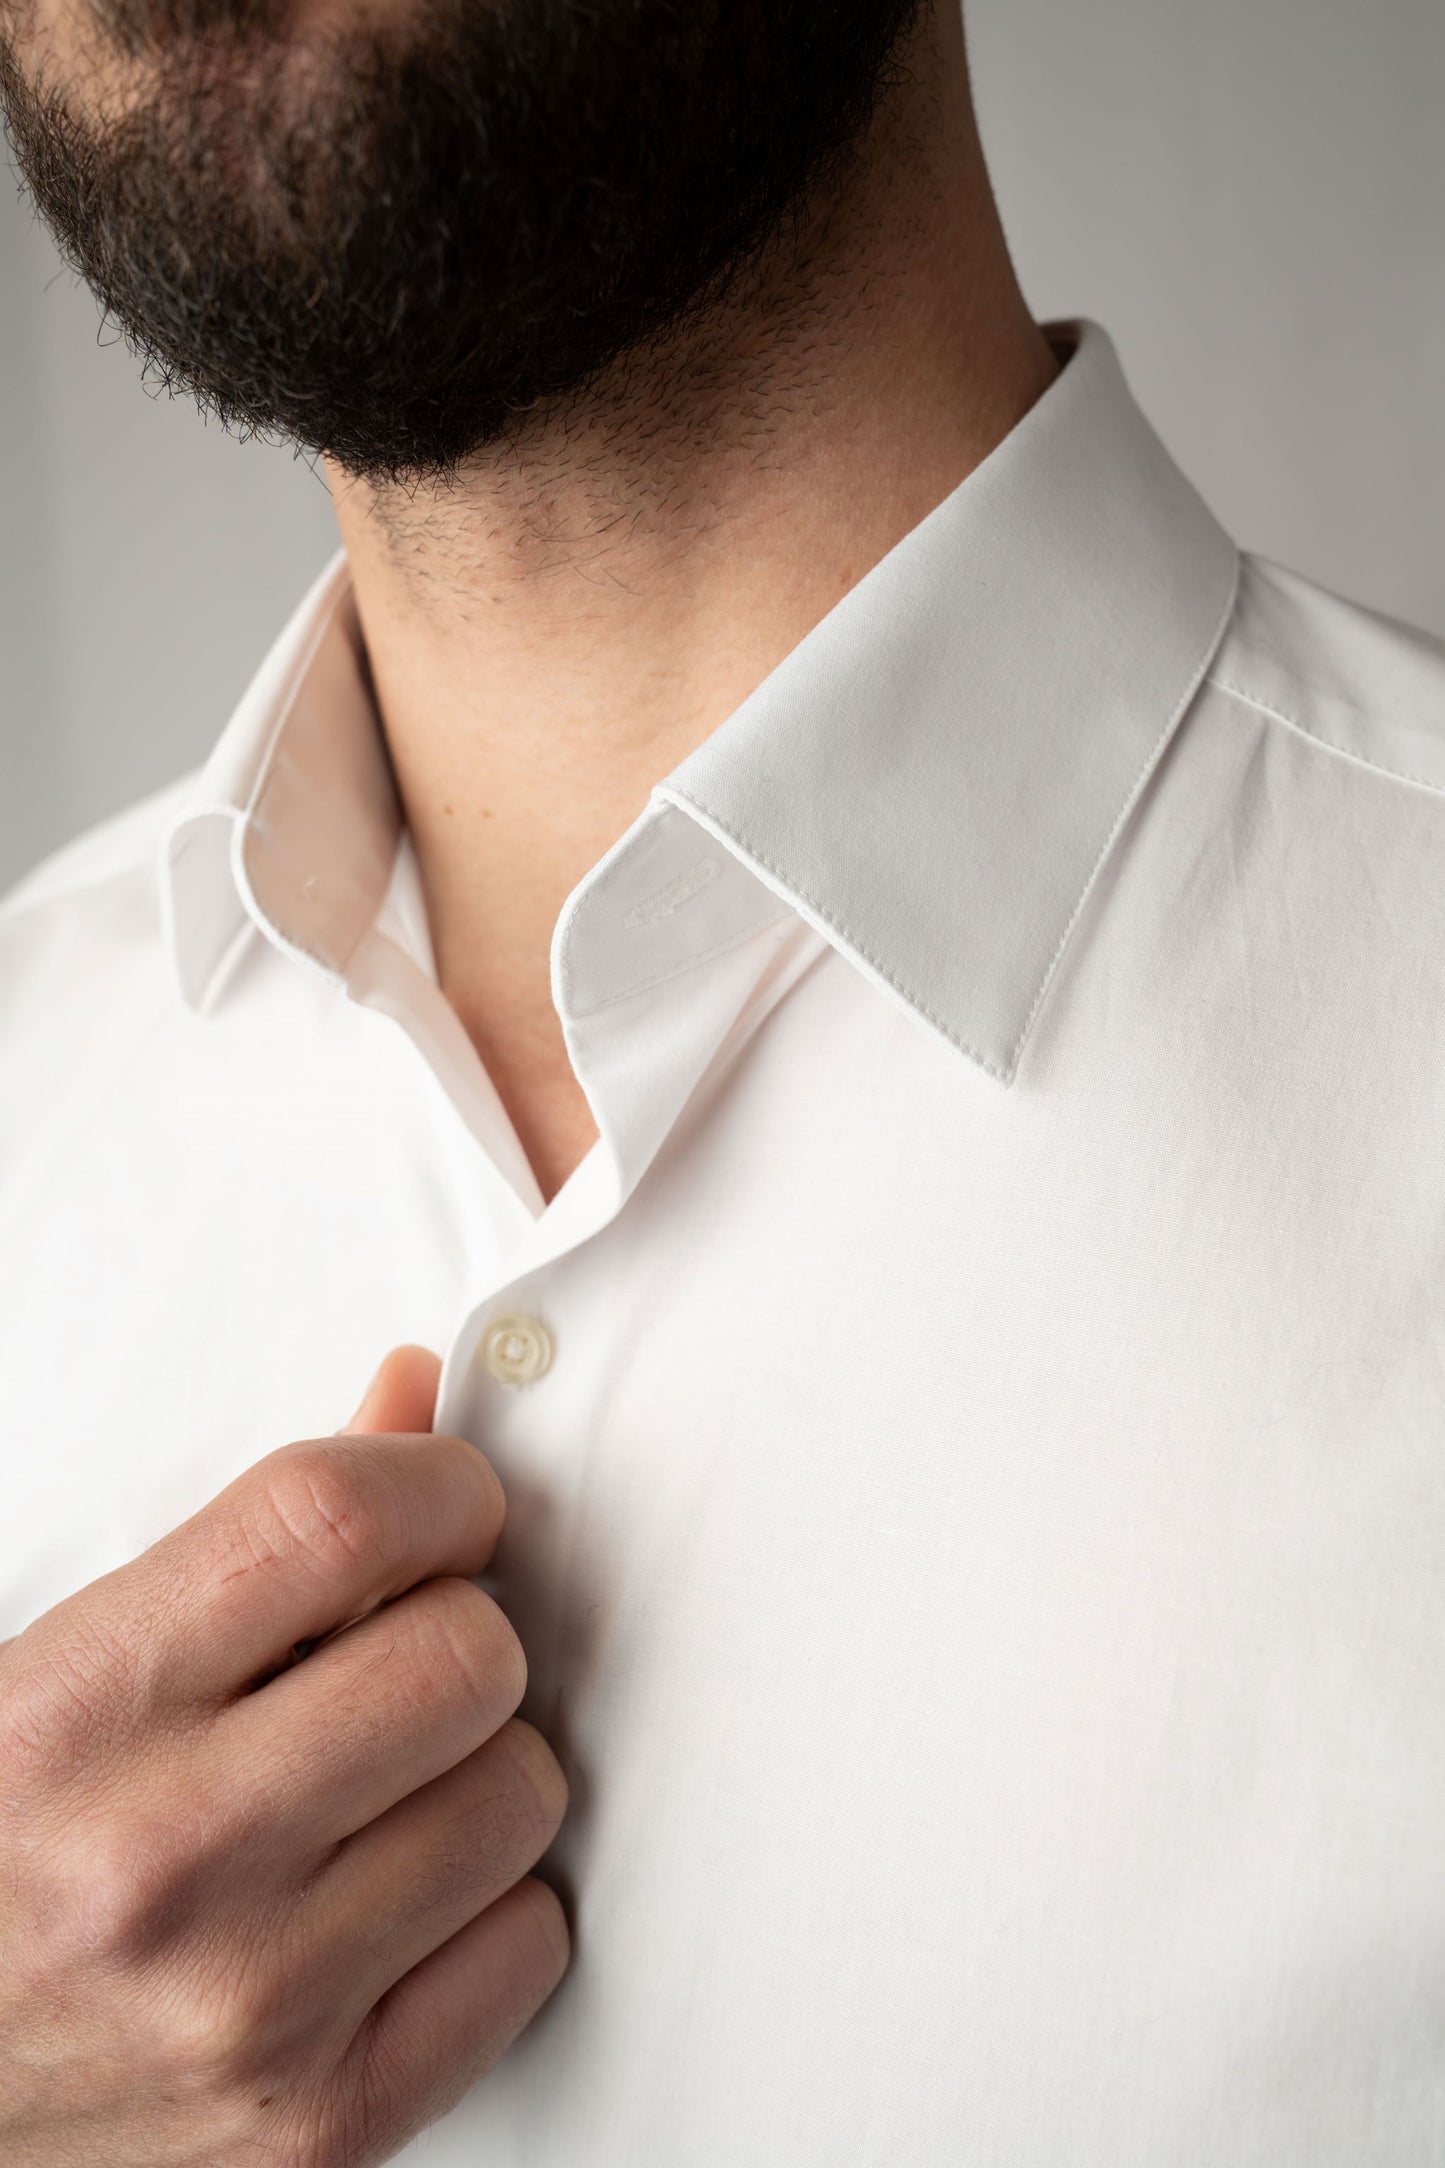 Easy Care White Solid Stretch Cotton Blend #cc68, Monogrammed Men's Custom Tailored Dress Shirt